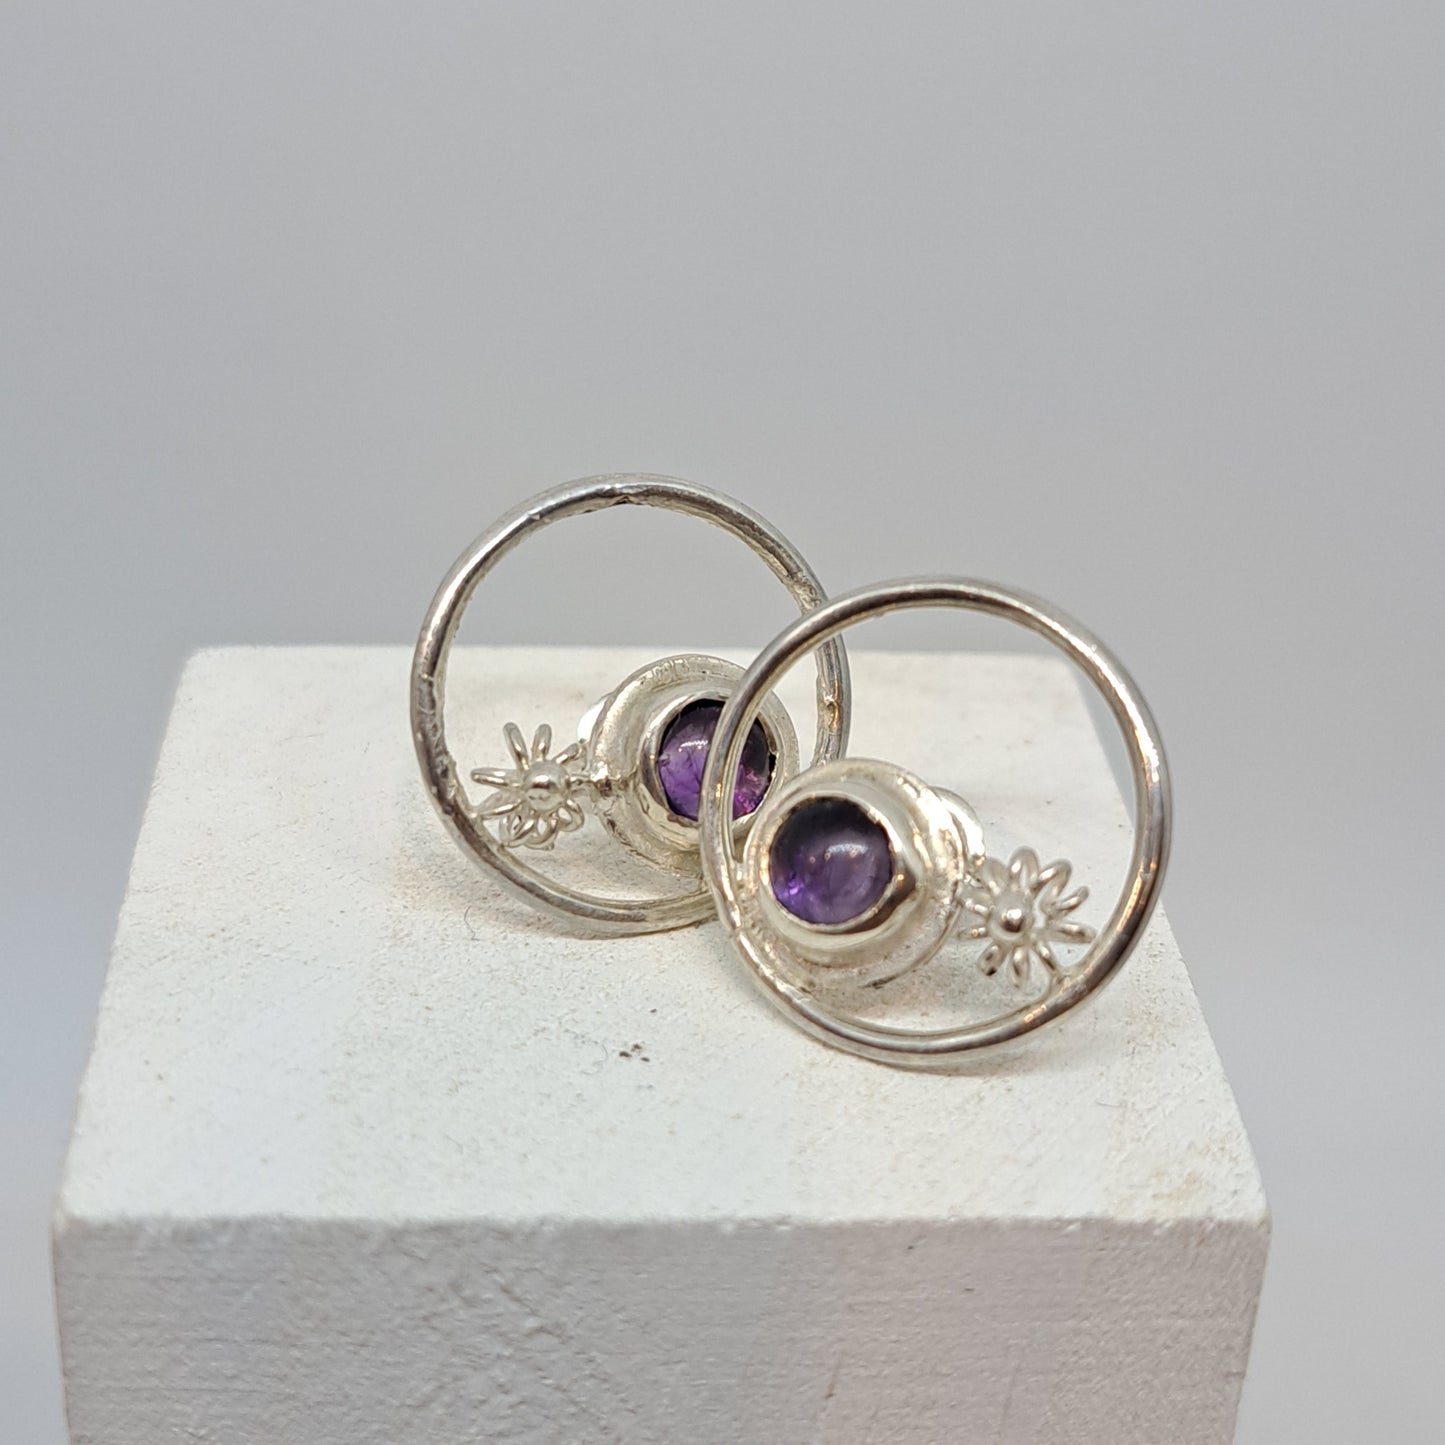 Amethyst and tomatino stud earrings